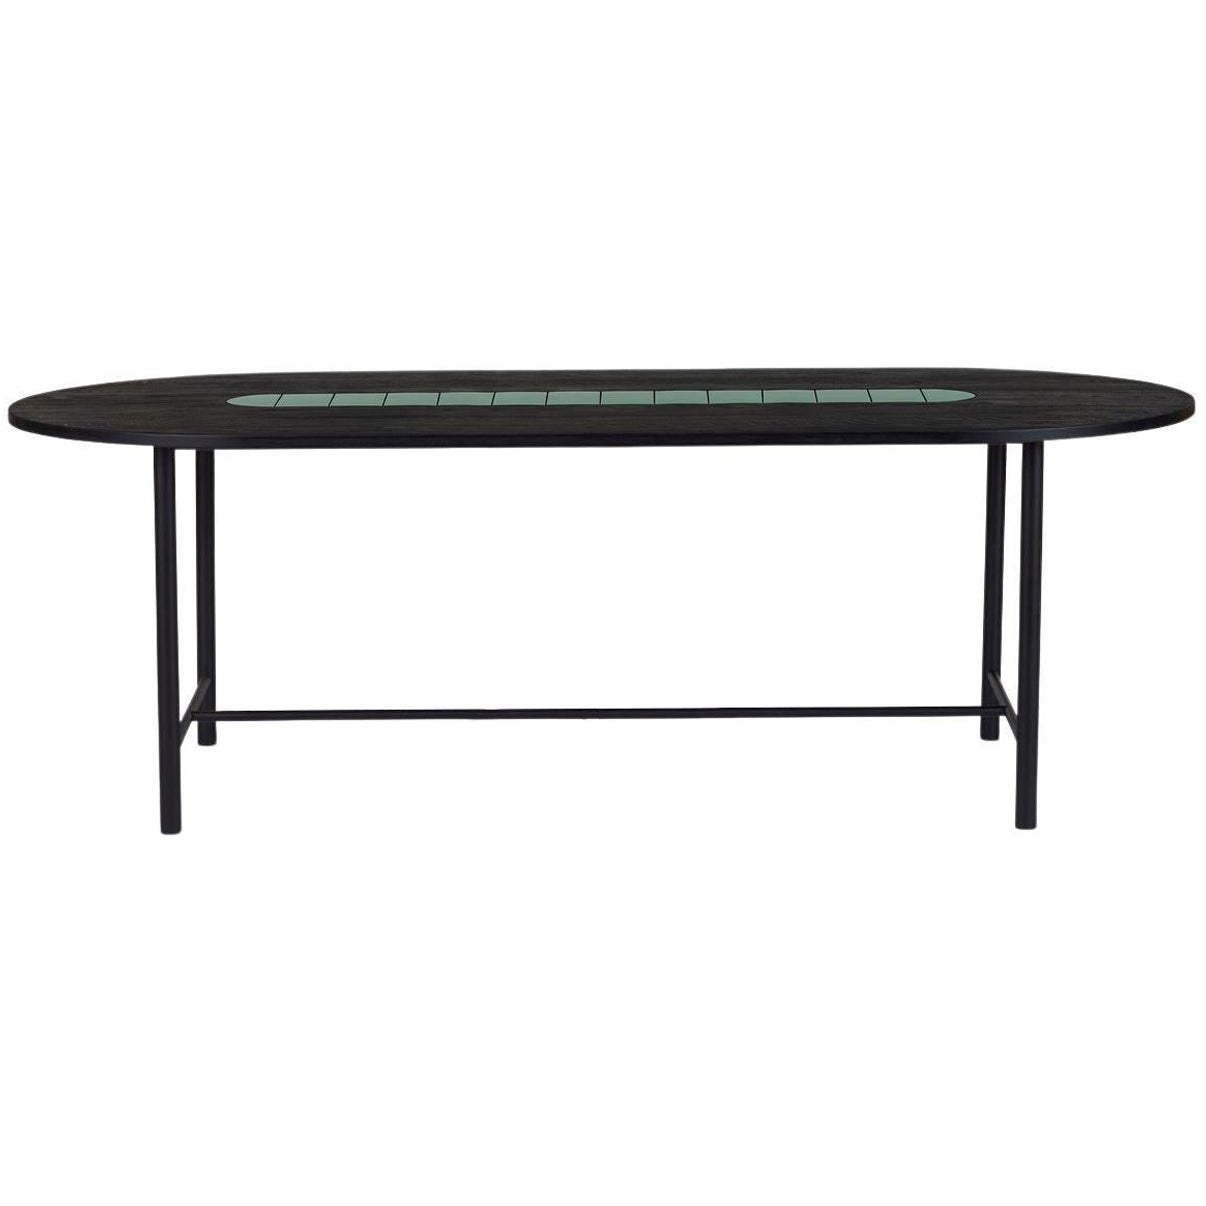 Be My Guest Dining Table 240 Black Oak Forrest Green by Warm Nordic For Sale